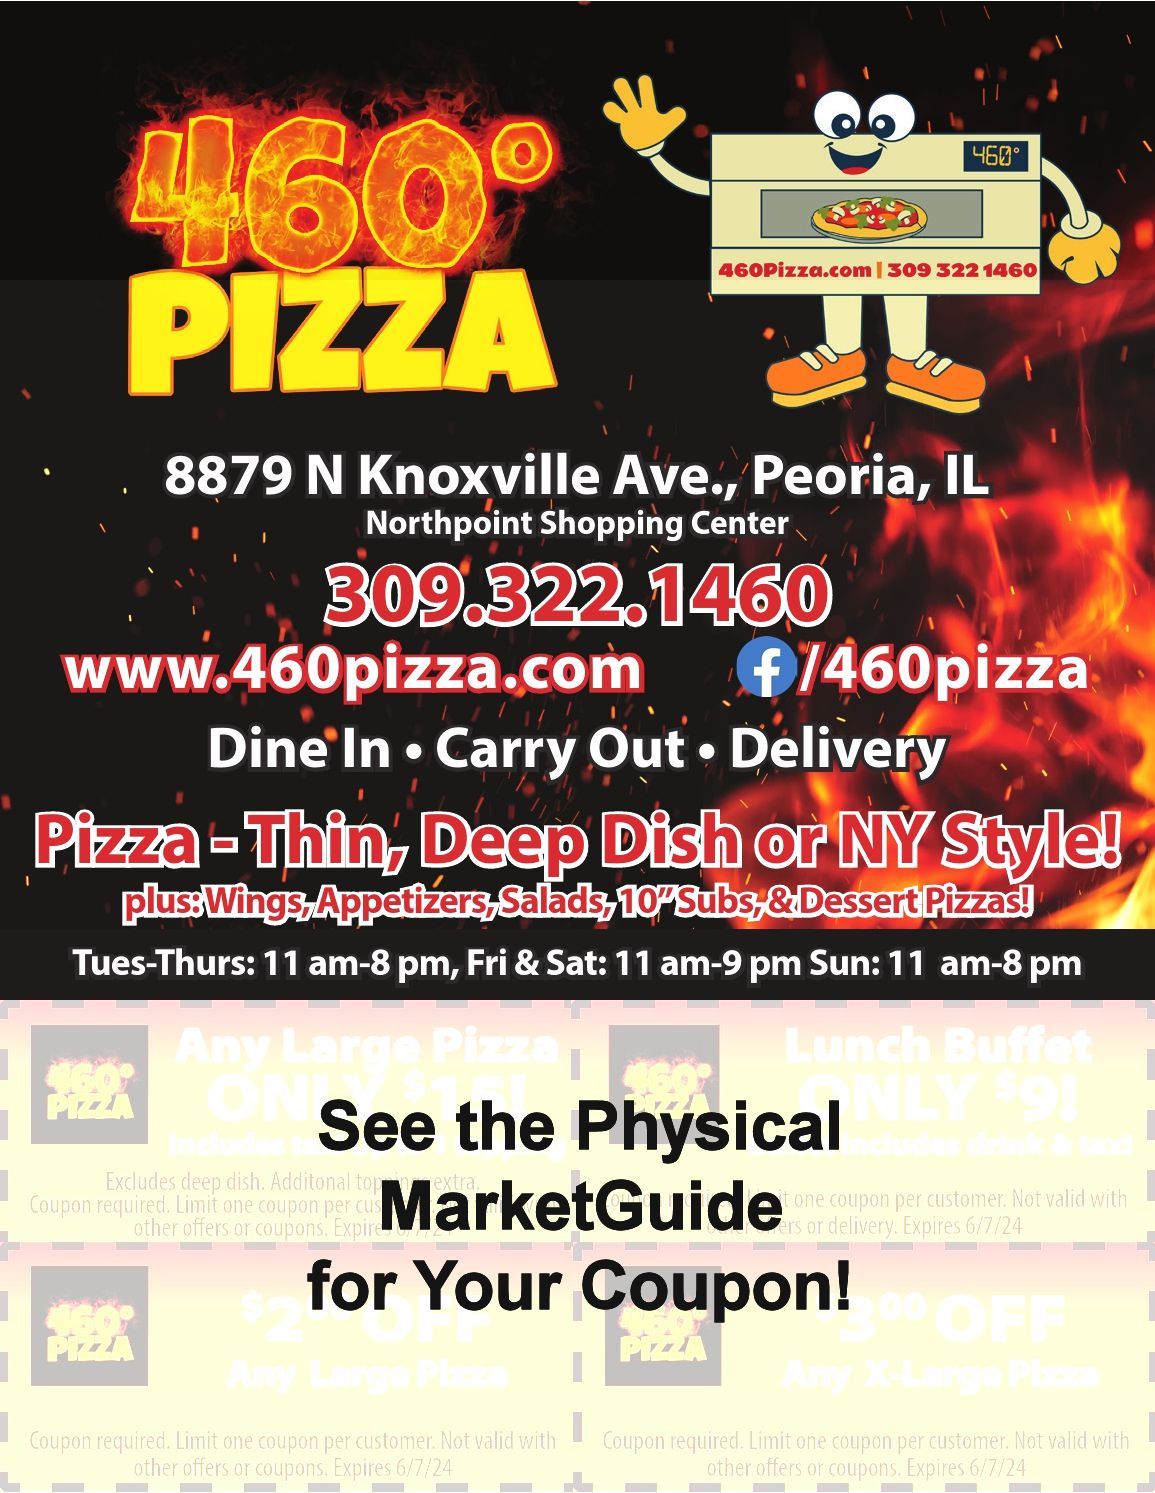 460 degree pizza coupons northpoint shopping center peoria, il